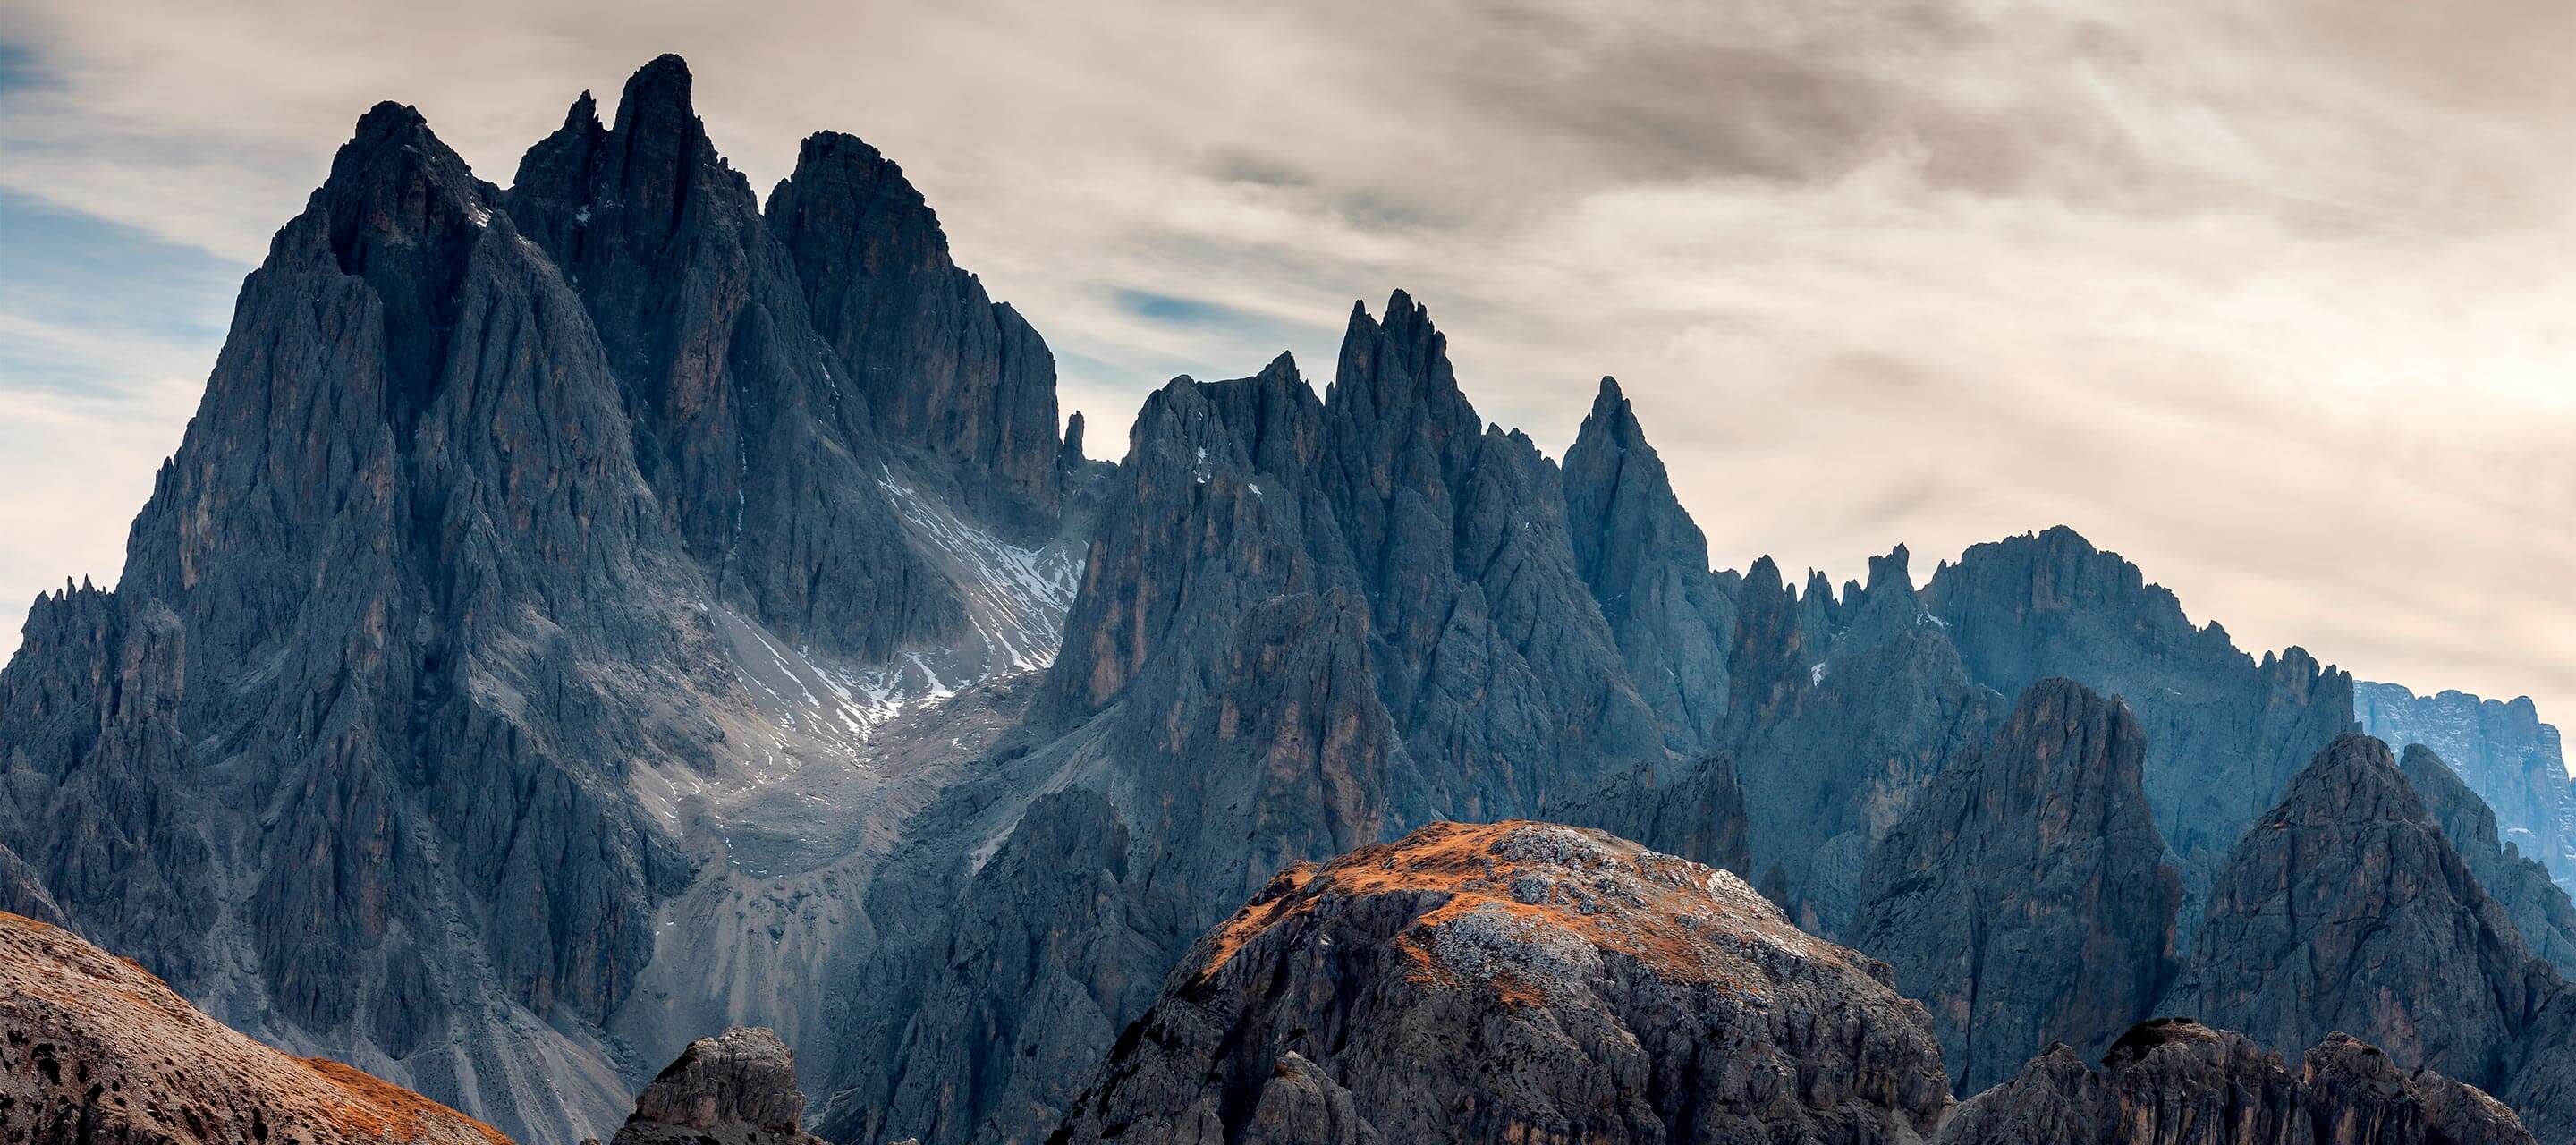 image shows mountains with pointed tops and grey clouded sky